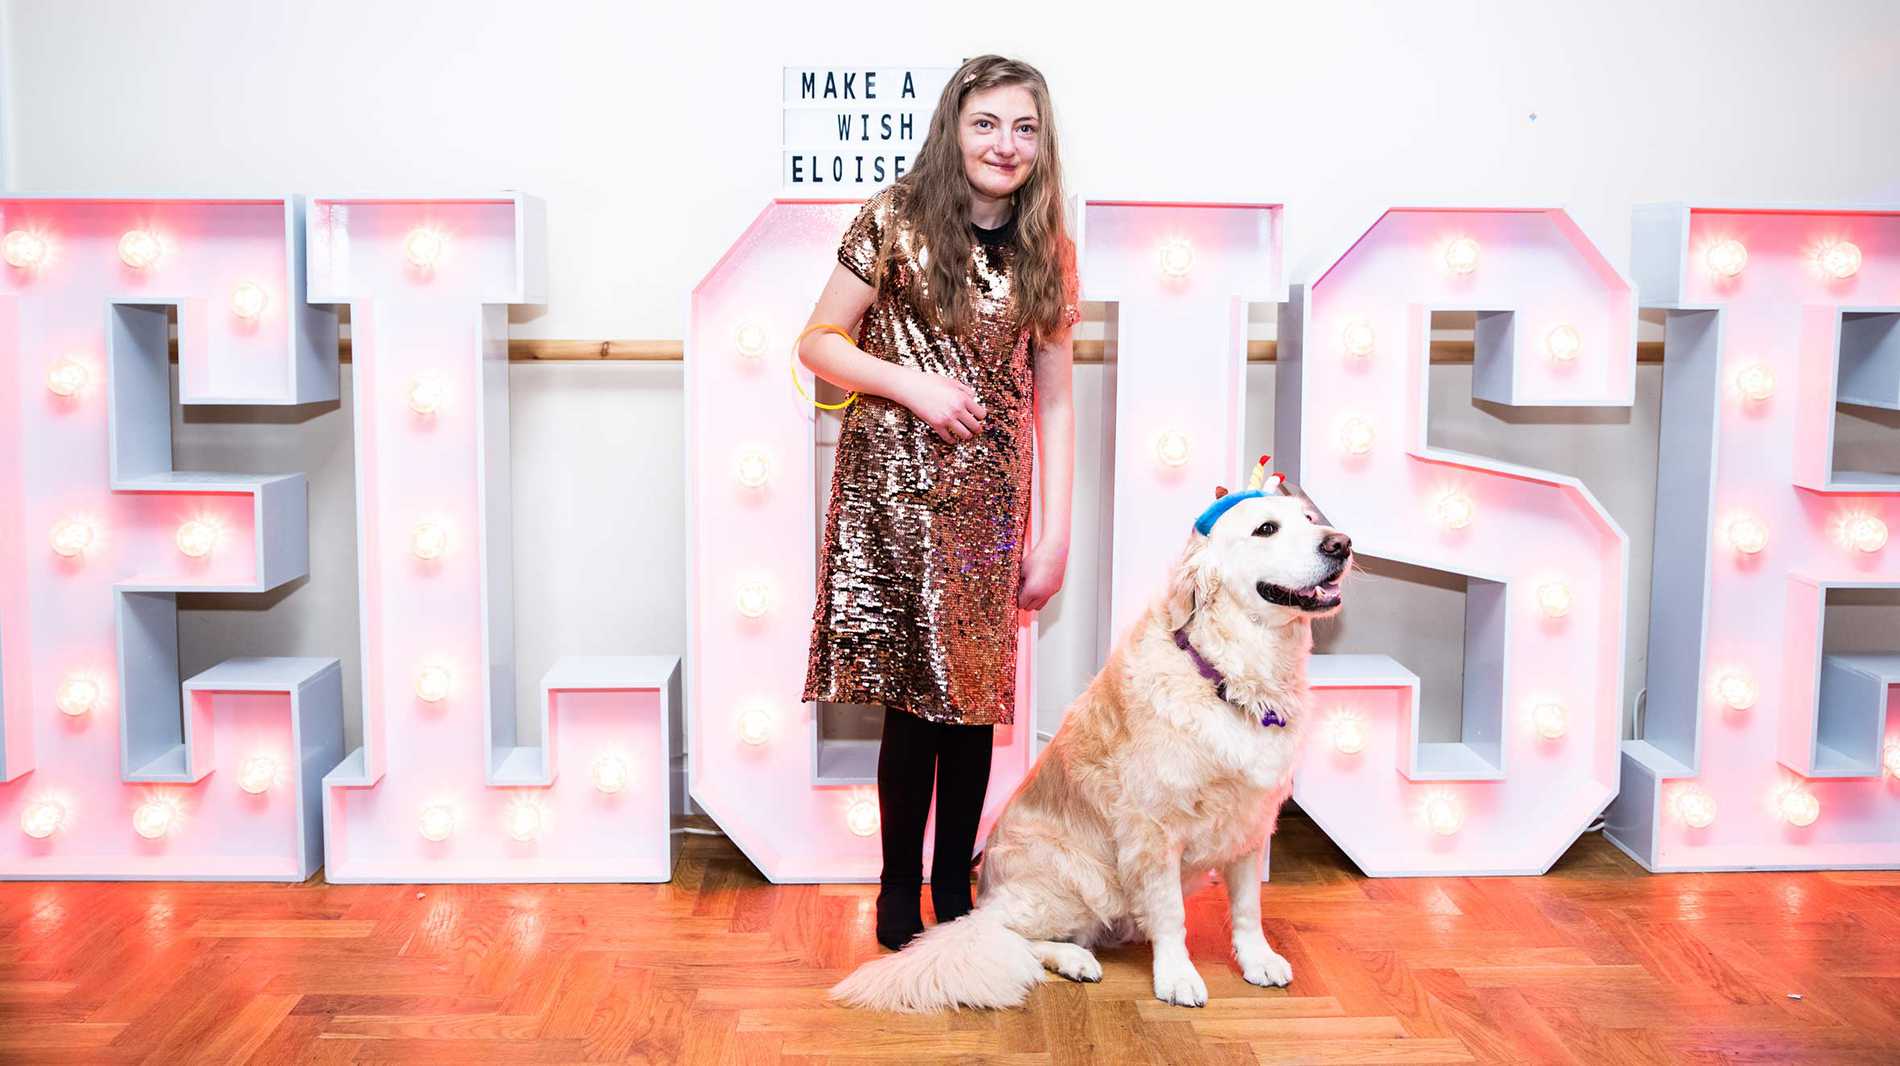 Eloise and her Golden Retriever in front of her name, spelled out in large light up letters.